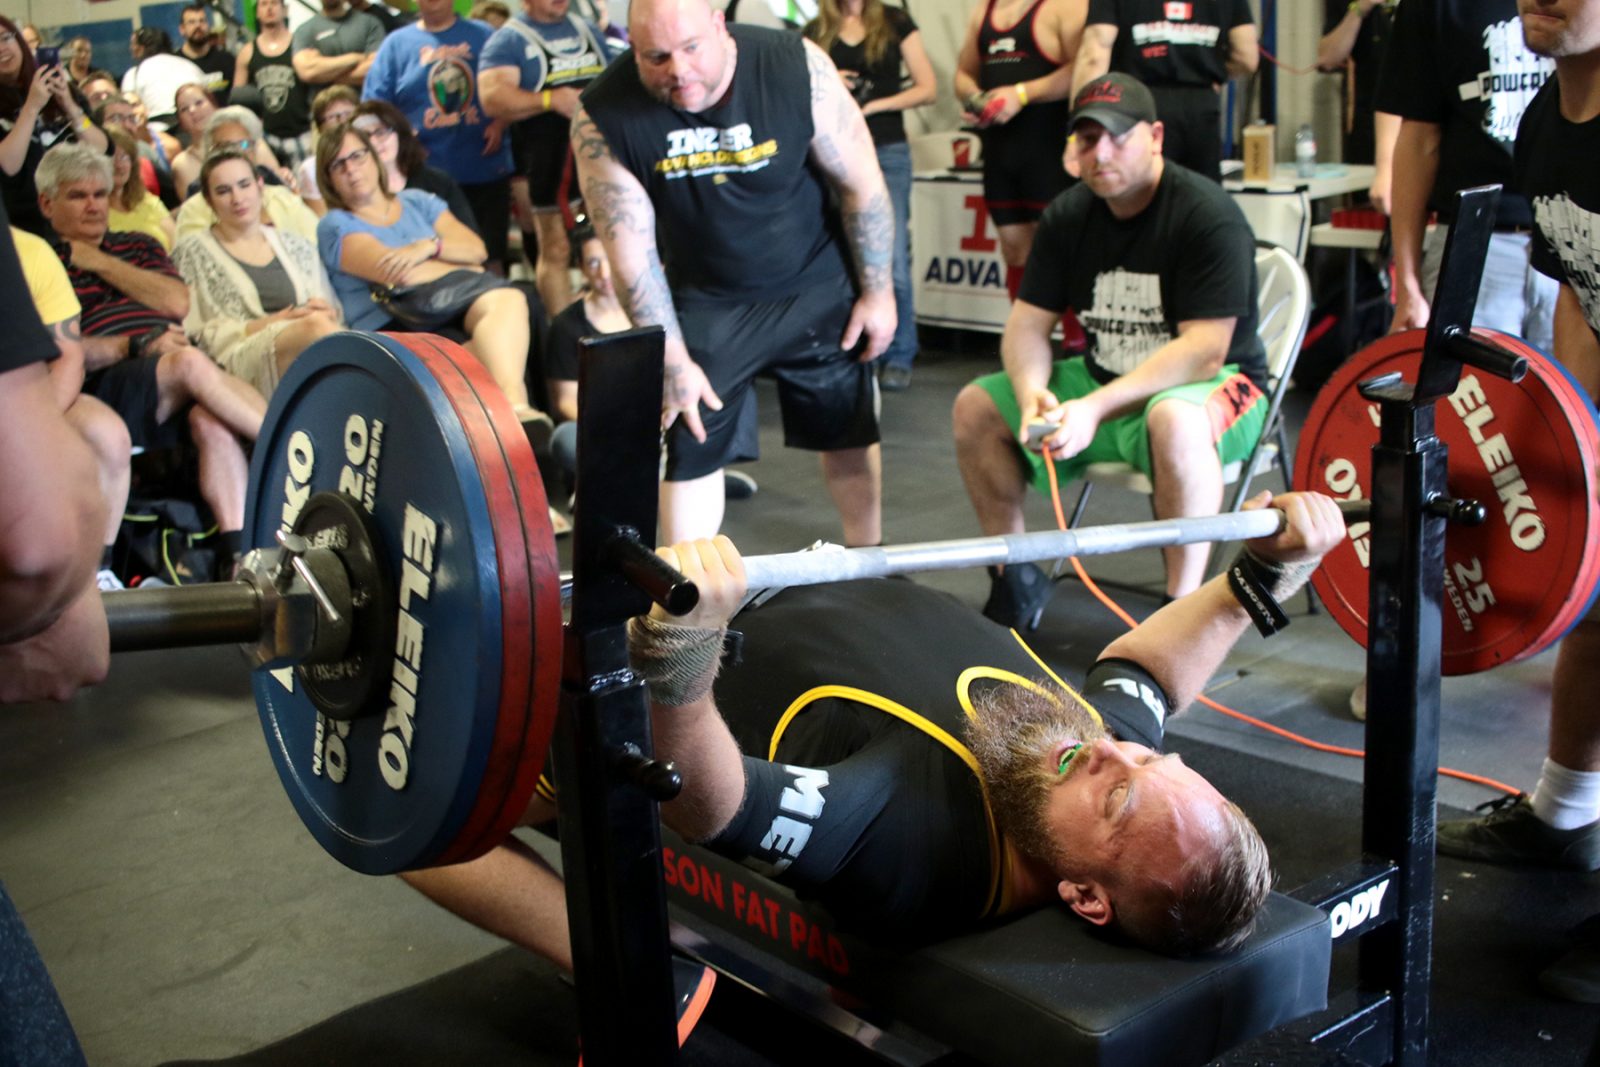 Quest holds weekend powerlifting competition